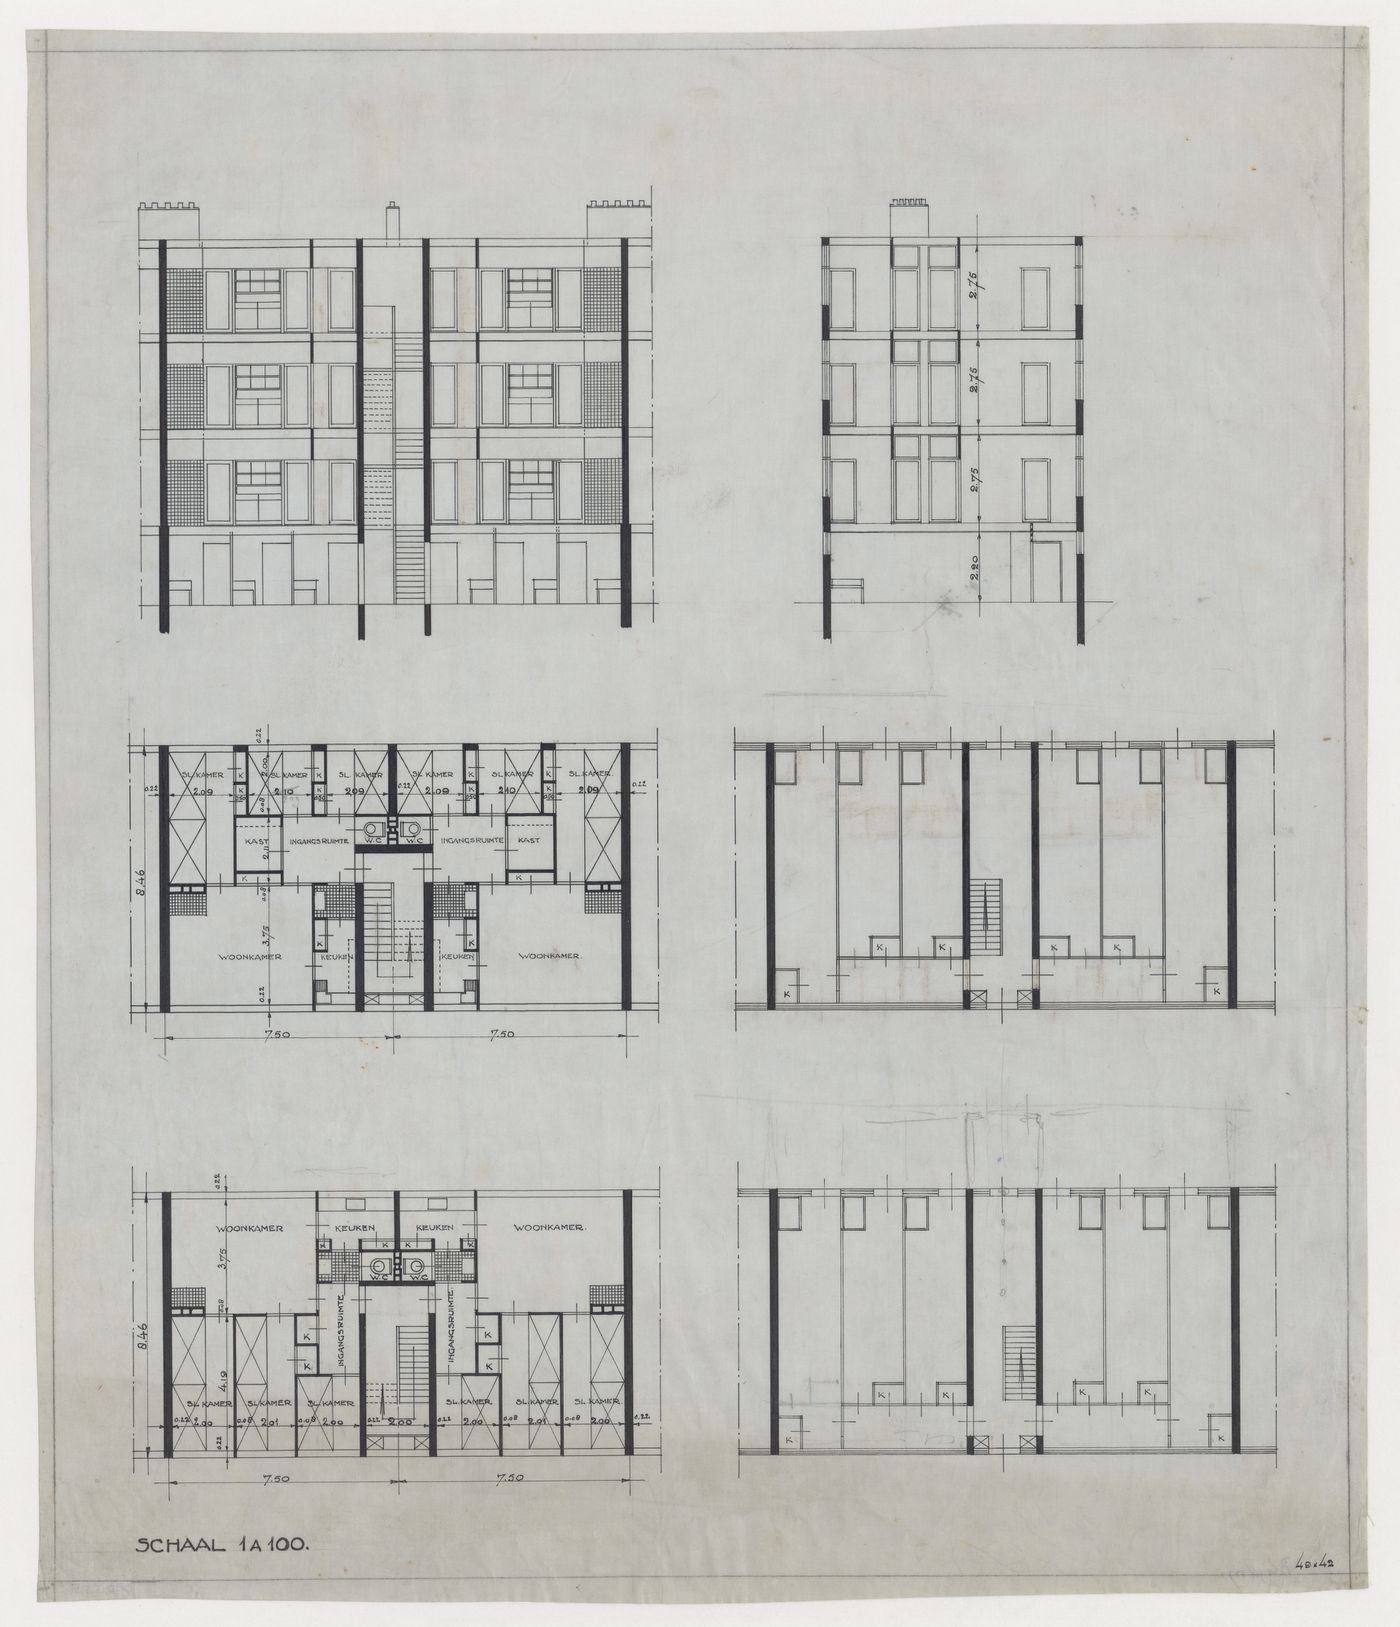 Plans and sections for two housing units for Blijdorp Workers' Housing Quarter, Rotterdam, Netherlands